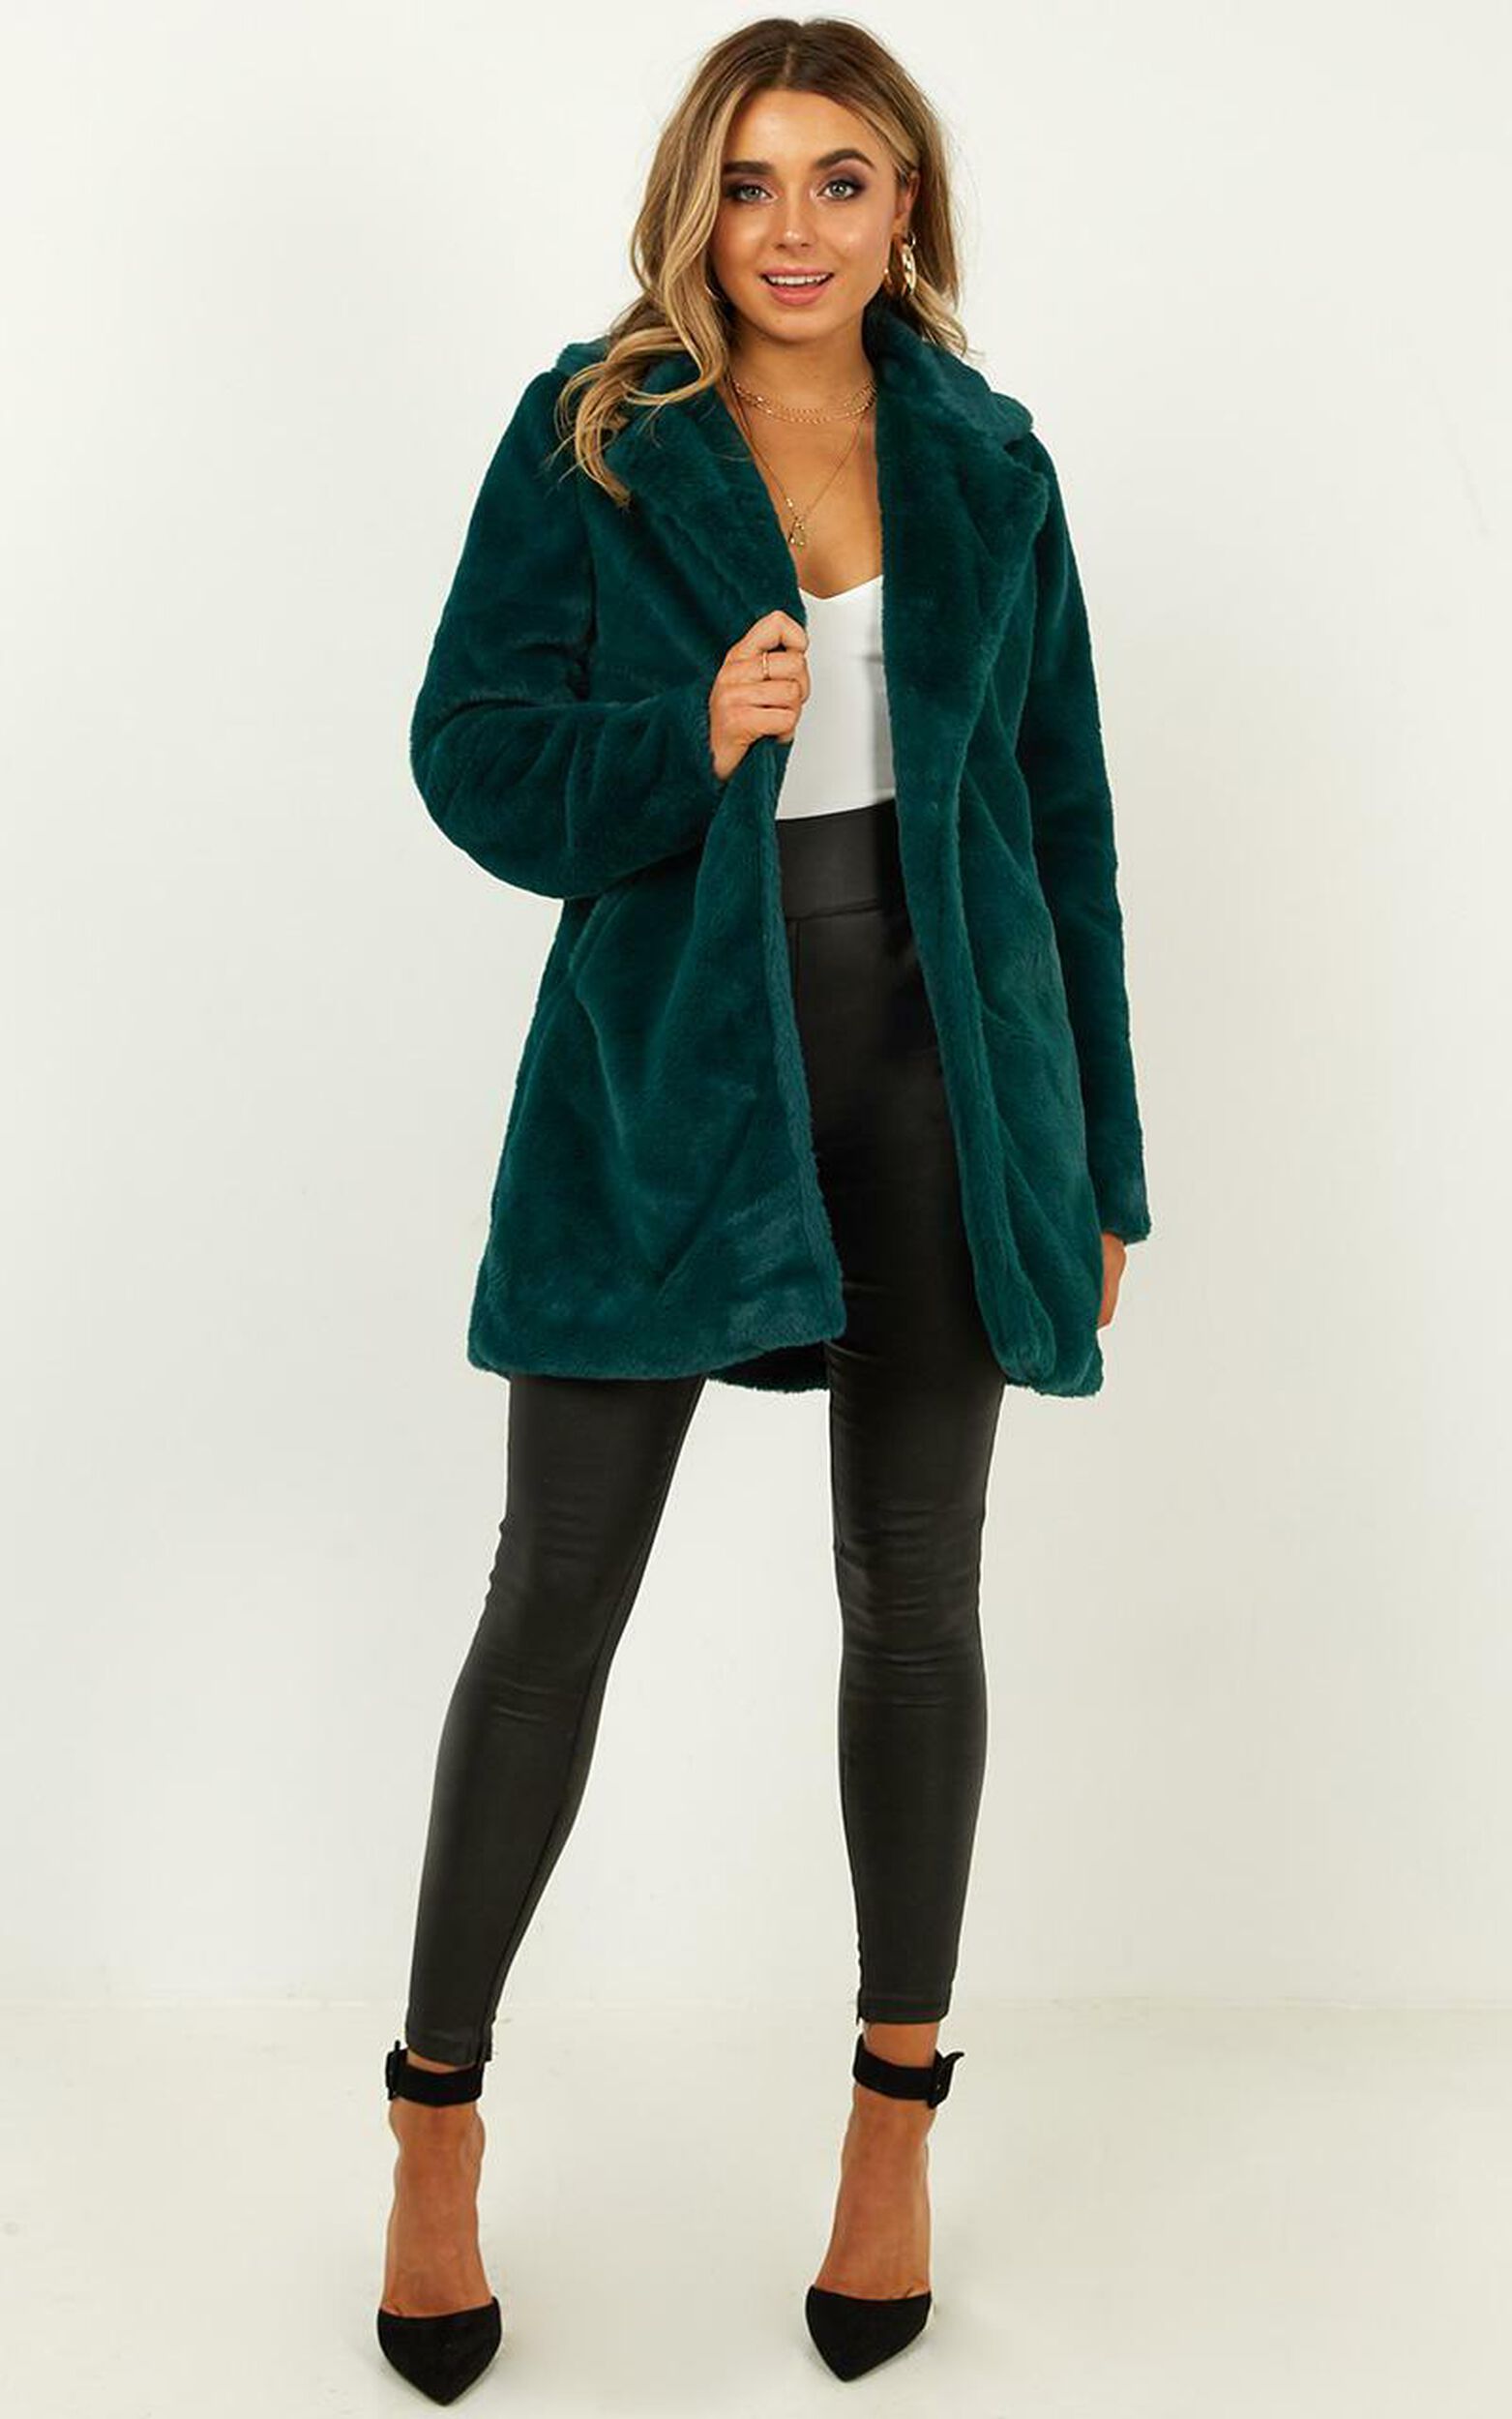 Leaning On You Coat in Emerald faux fur - 12, GRN2